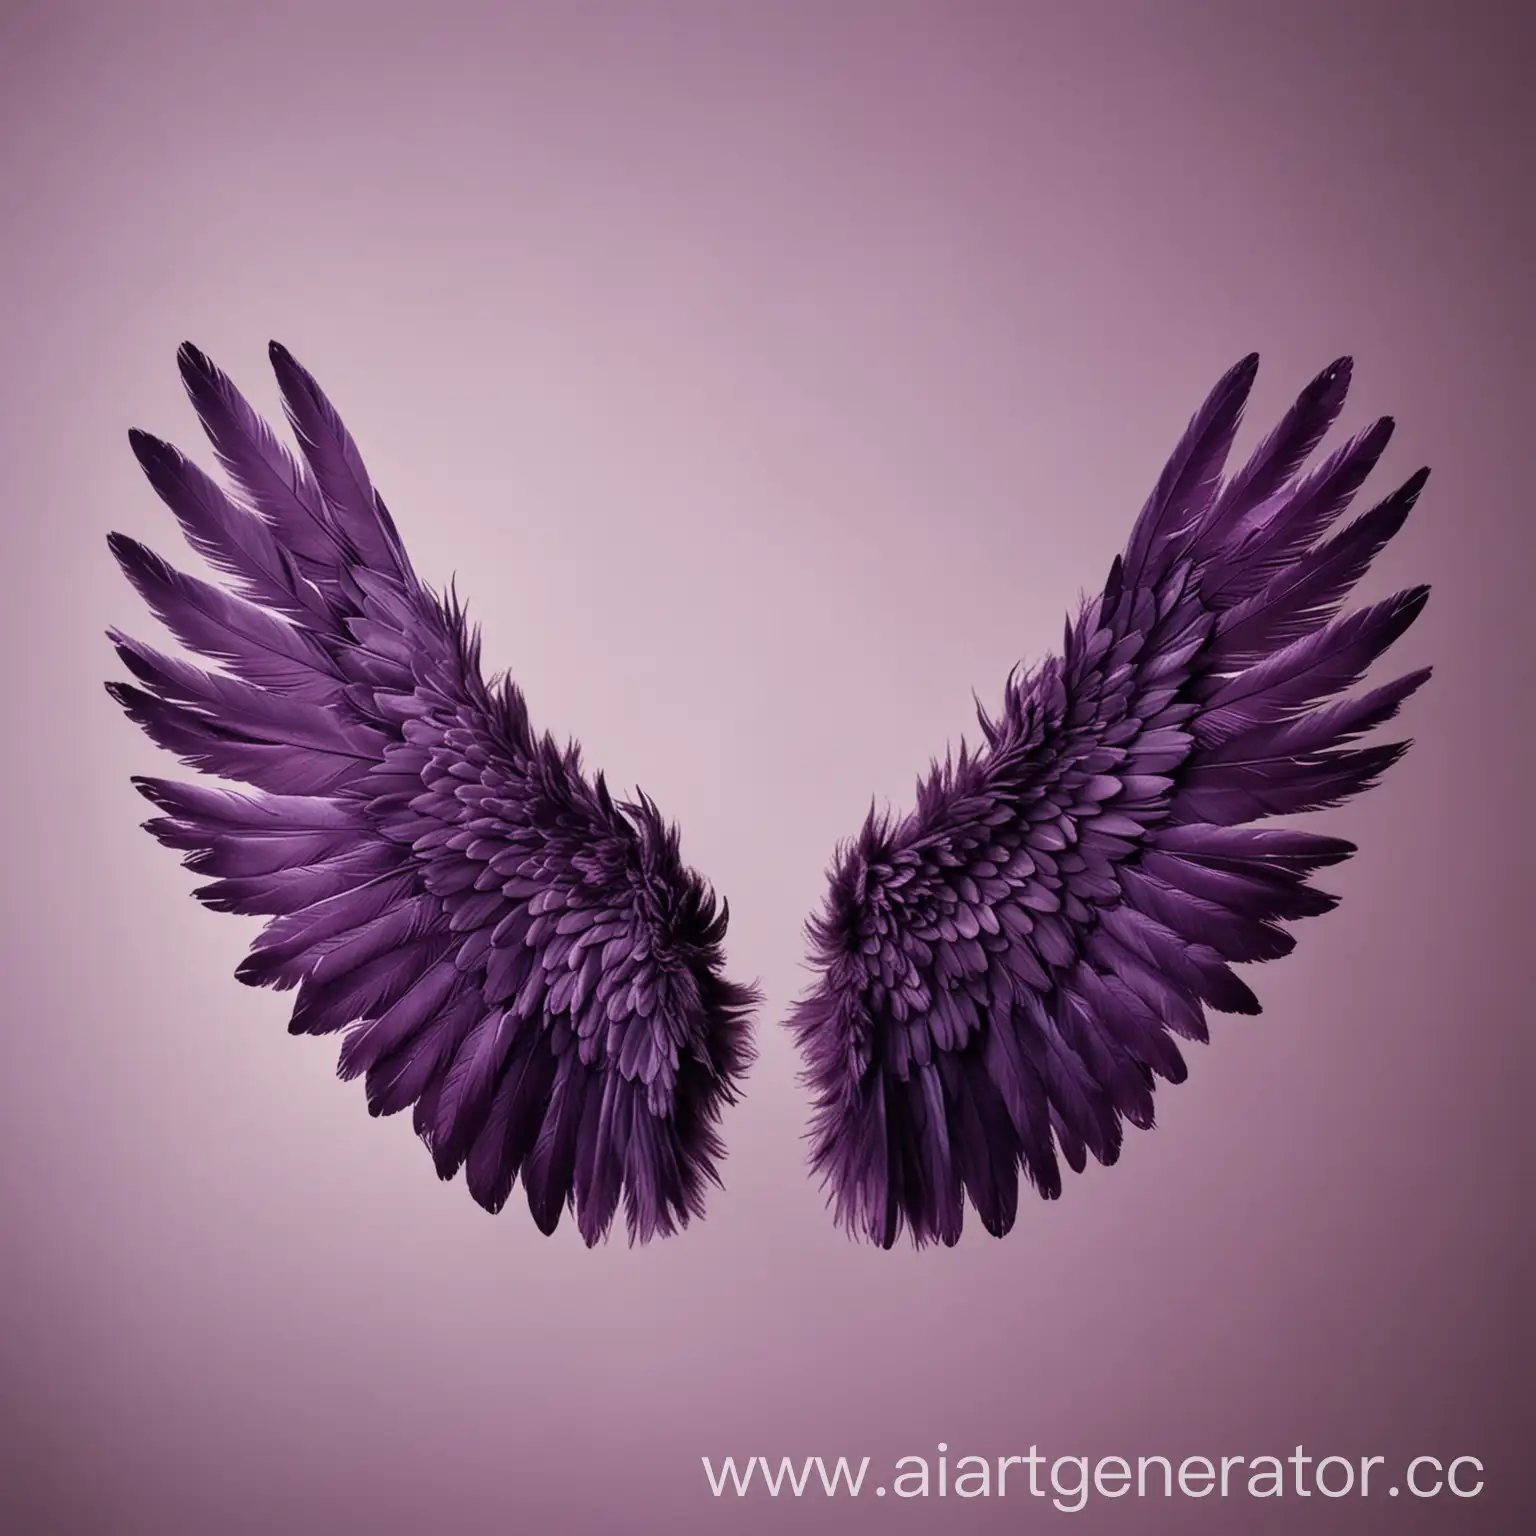 Ethereal-Angel-with-Dark-Purple-Wings-on-Radiant-Light-Background